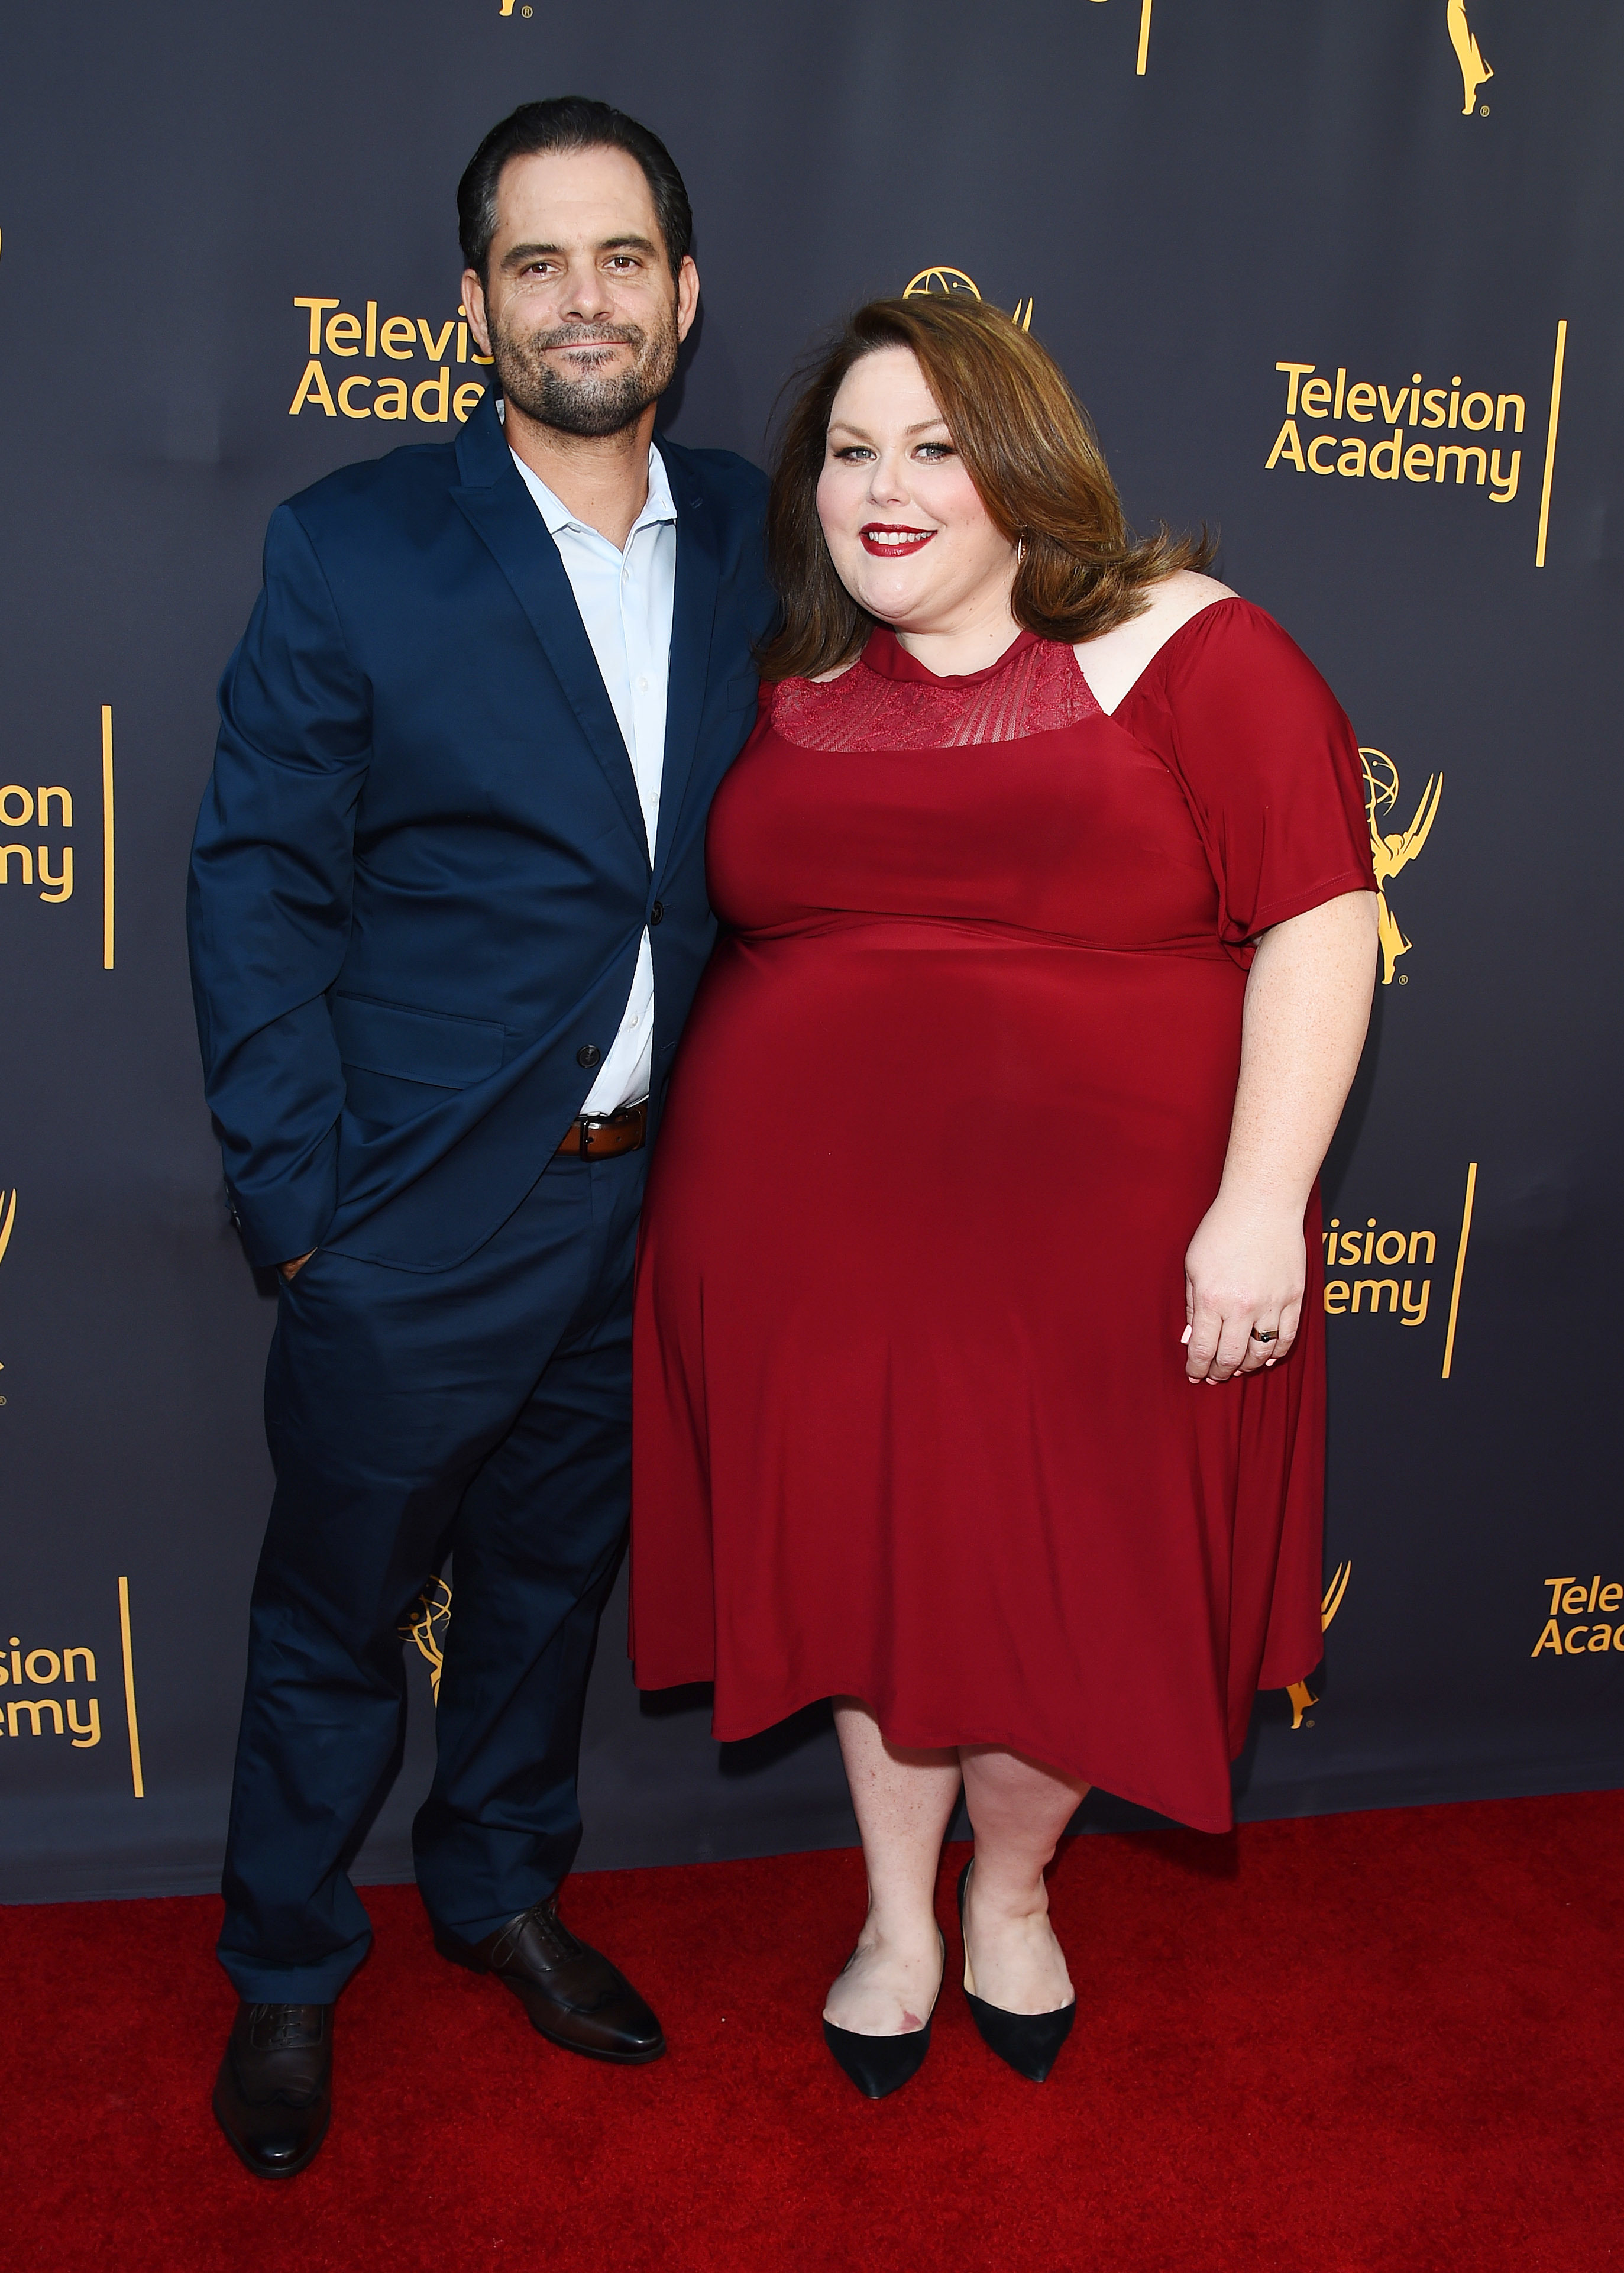 <p>Chrissy Metz and future-ex-boyfriend Josh Stancil met at work. In August 2016, they were wrapping the second episode of "This Is Us" -- she was starring as Kate Pearson, he was working as a camera grip -- when she saw him eating a taco bowl while putting stuff away in his truck, she told Marie Claire. "I was like, oh he's cute, with shorts and his backward hat, kind of masculine," she told the magazine. "Before I even know it, I called out, 'You better slow down or you're going to choke on your food.' I am typically a little more charismatic than that, I swear." After a month of exchanging hellos on set, "it was very unexpected," she added, when Josh asked her out for a drink. They started dating and a few months later made their <a href="http://www.wonderwall.com/celebrity/couples/this-is-us-star-chrissy-metz-makes-first-red-carpet-appearance-with-boyfriend-josh-stancil-1956237.article">red carpet debut</a> as a couple at a <a href="http://www.wonderwall.com/awards-events/red-carpet/sag-awards-2017-screen-actors-guild-awards-arrivals-fashion-36370.gallery">2017 SAG Awards</a> party. In March 2018, Chrissy confirmed they'd split.</p>